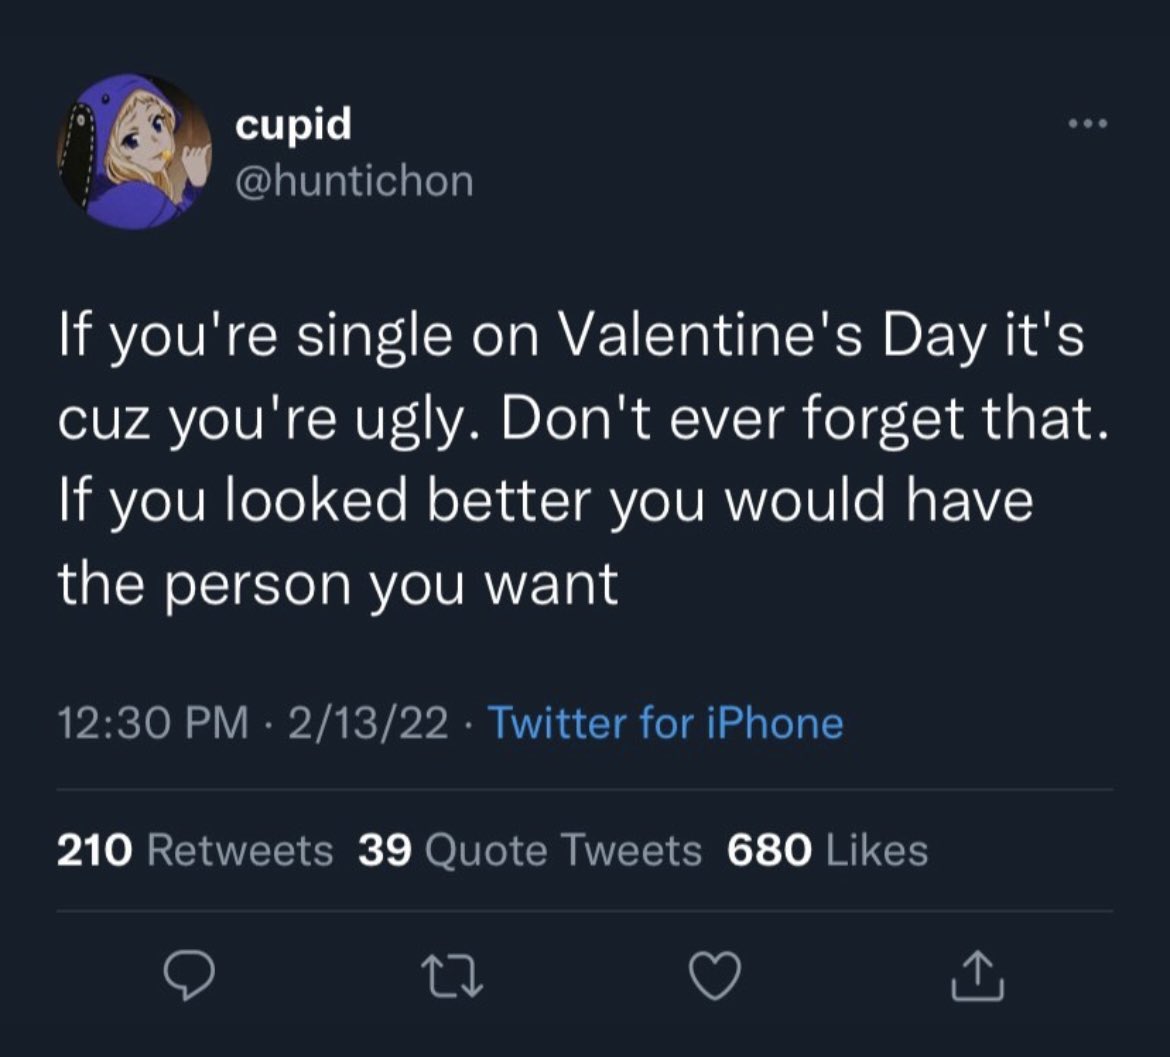 unhinged tweets - i m not okay twitter quotes - cupid If you're single on Valentine's Day it's cuz you're ugly. Don't ever forget that. If you looked better you would have the person you want 21322 Twitter for iPhone 210 39 Quote Tweets 680 22